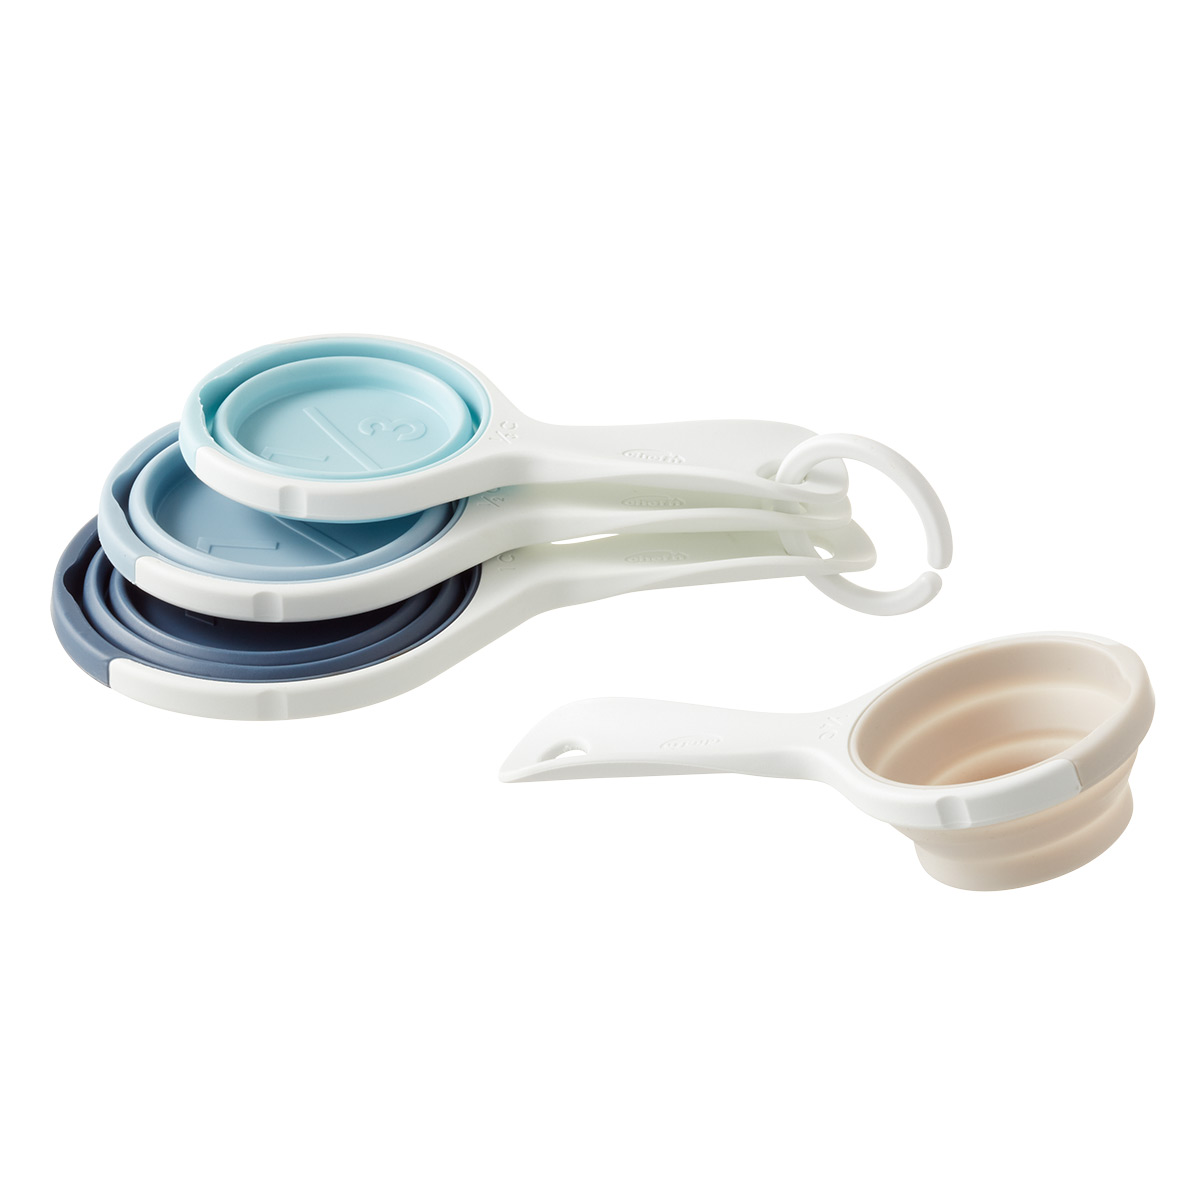 https://www.containerstore.com/catalogimages/476136/10050172-collapsible-measuring-cups.jpg